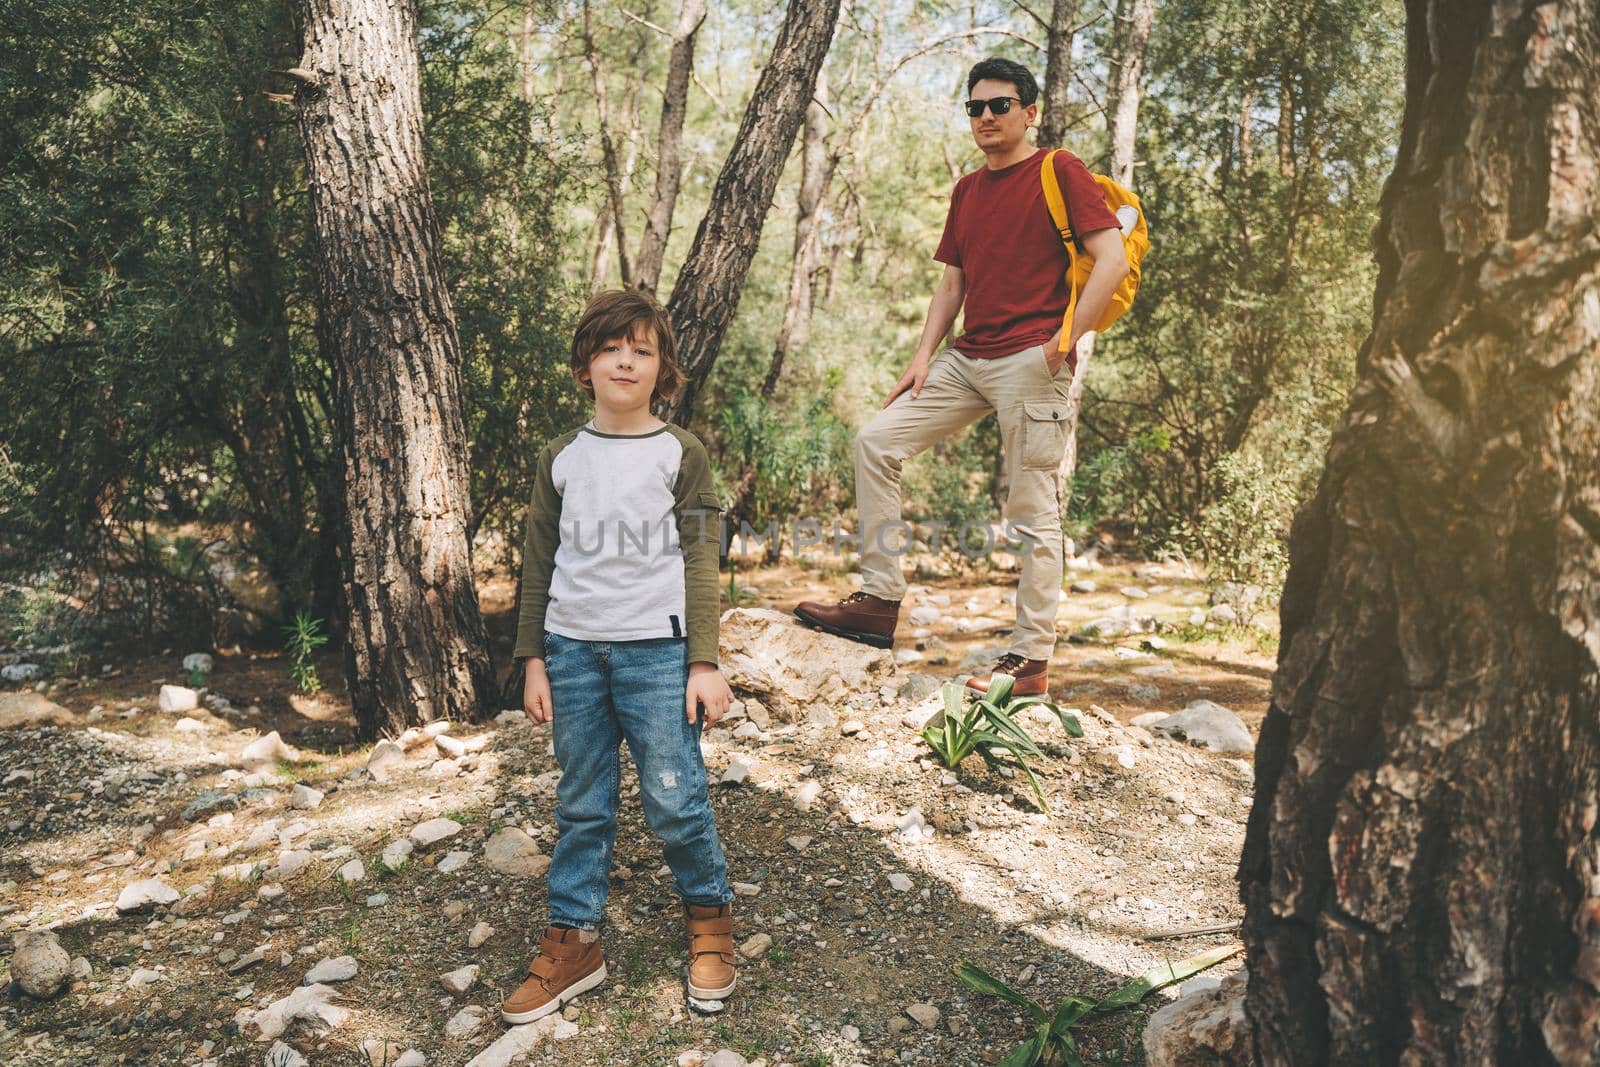 Tourists school boy and his dad walking in the spring forest. Child boy and father wearing casual clothes hiking in summer greenwood leaf forest. Family adventure in the woods.